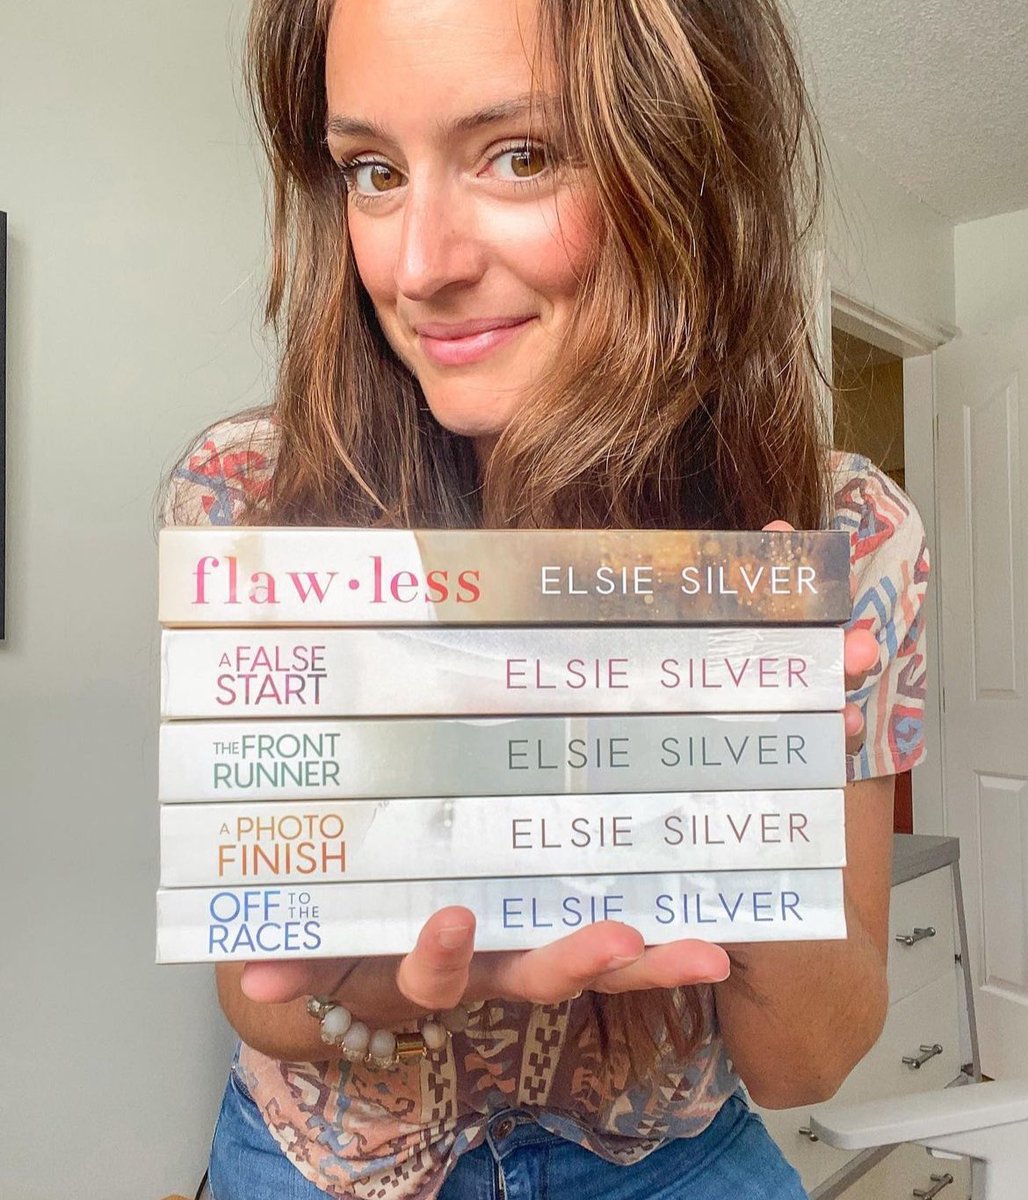 Day 1 of #remarkableauthors

ELSIE SILVER

#elsiesilver is a genius romance author who sets her stories in rural Canada, giving readers a taste of the Western and small-town lifestyle!

#elsiesilver #chestnutsprings #flawlesselsiesilver #heartlesselsiesilver